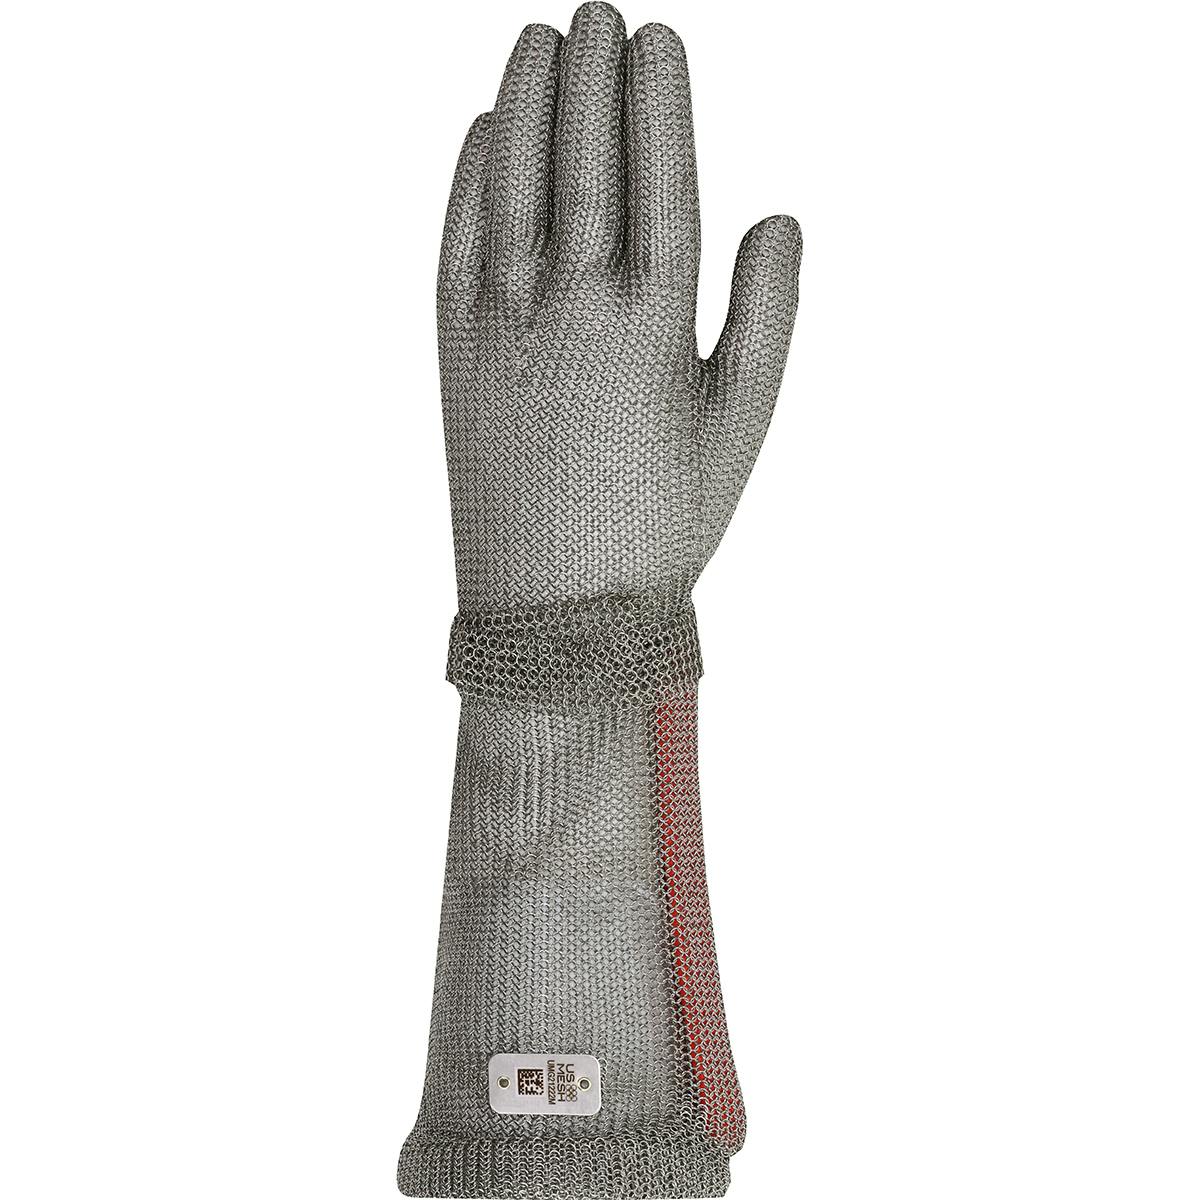 US Mesh® Stainless Steel Mesh Glove with Spring Closure - Forearm Length (USM-1547)_1